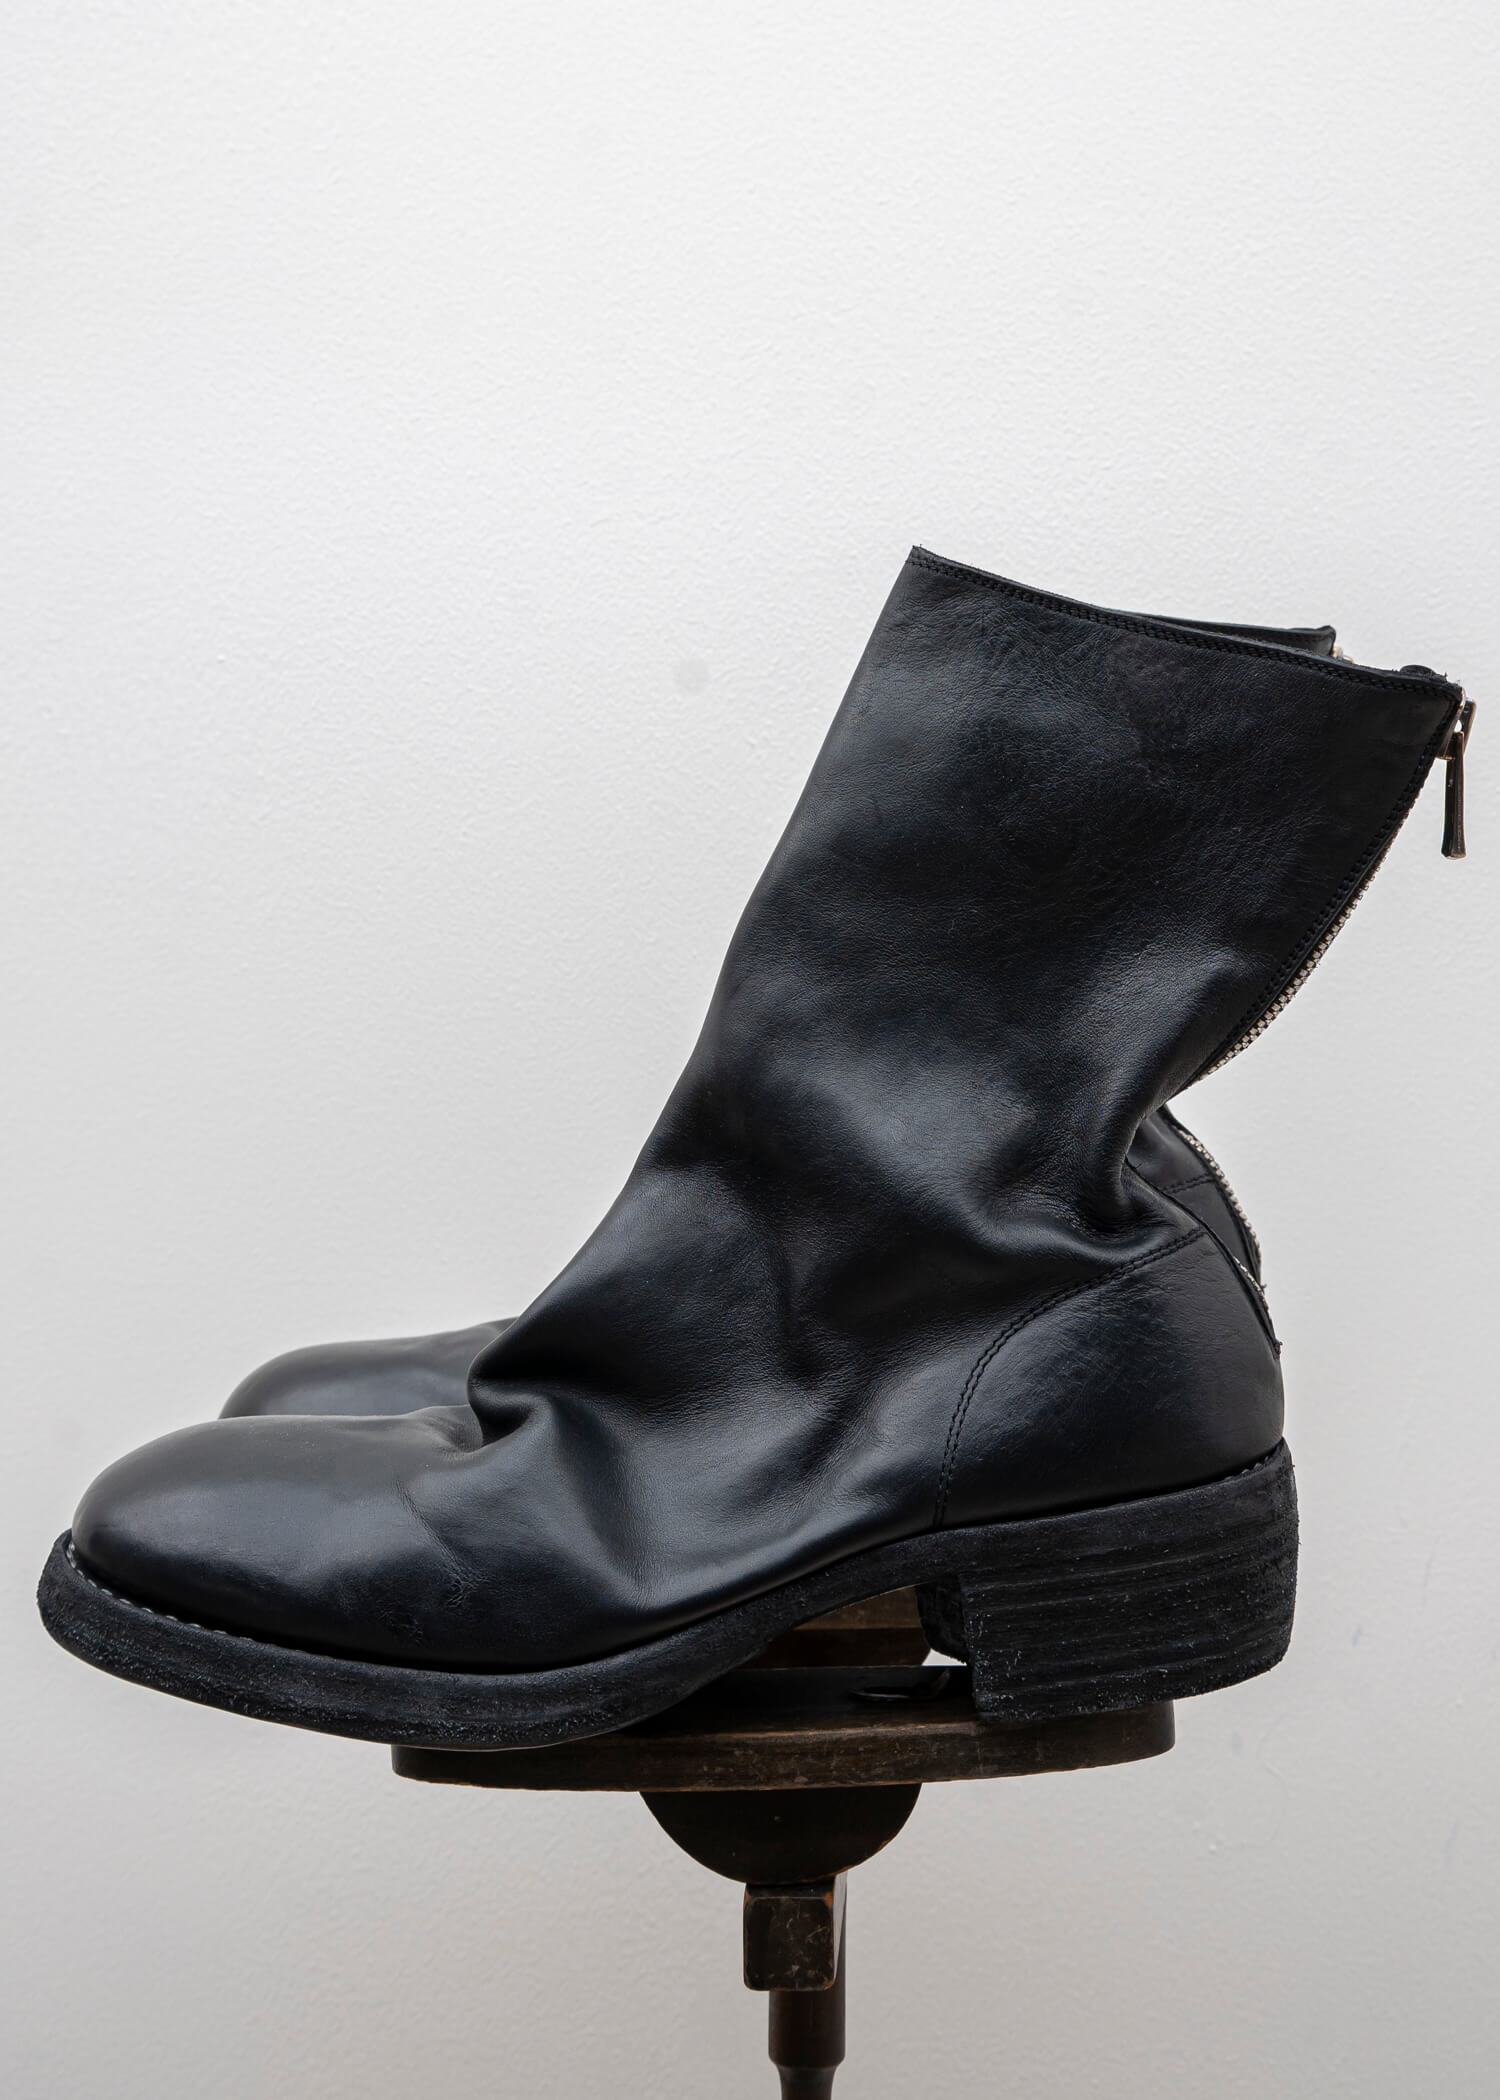 GUIDI / "788Z" BACK ZIP MID BOOT / HORSE FULL GRAIN / THICK SOLE LEATHER / BLKT / BLACK